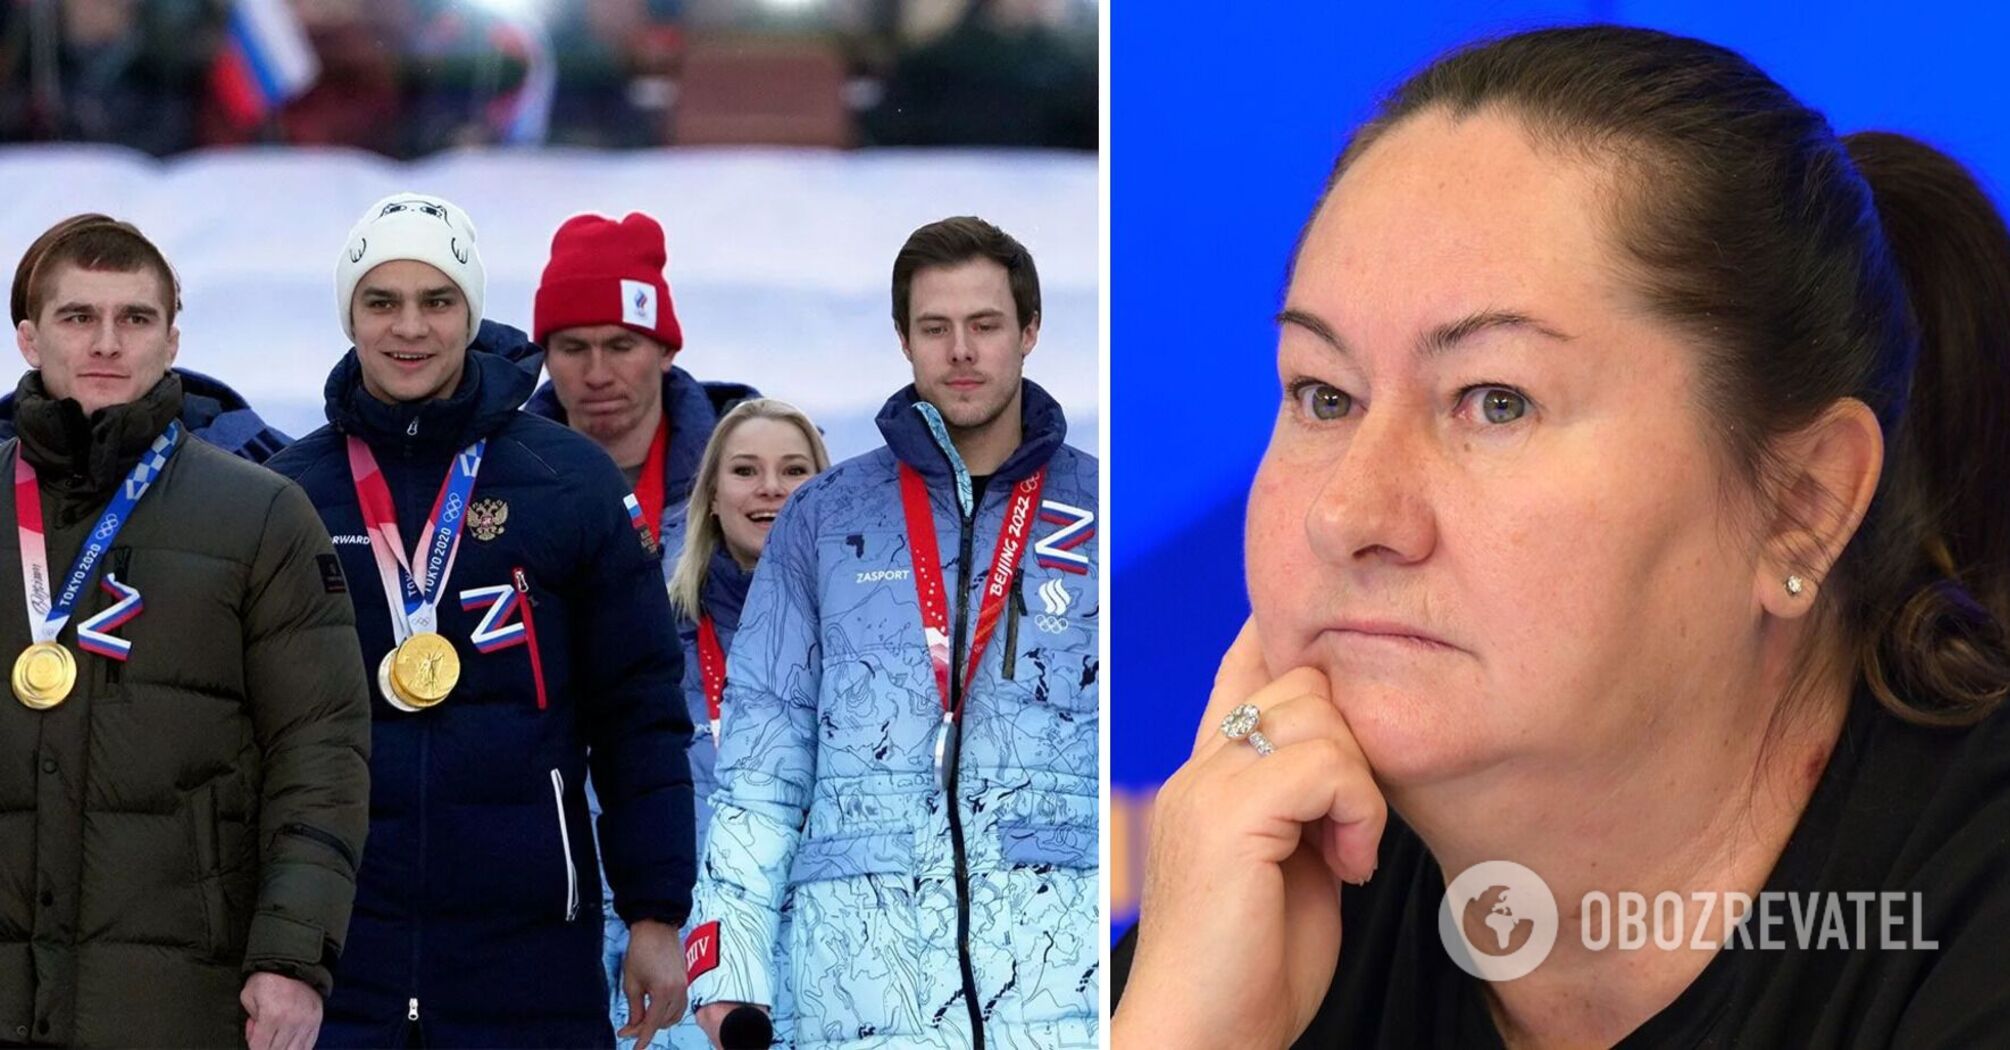 'Have we declared war on anyone?' Russian Olympic champion cynically responds to calls for an Olympic truce